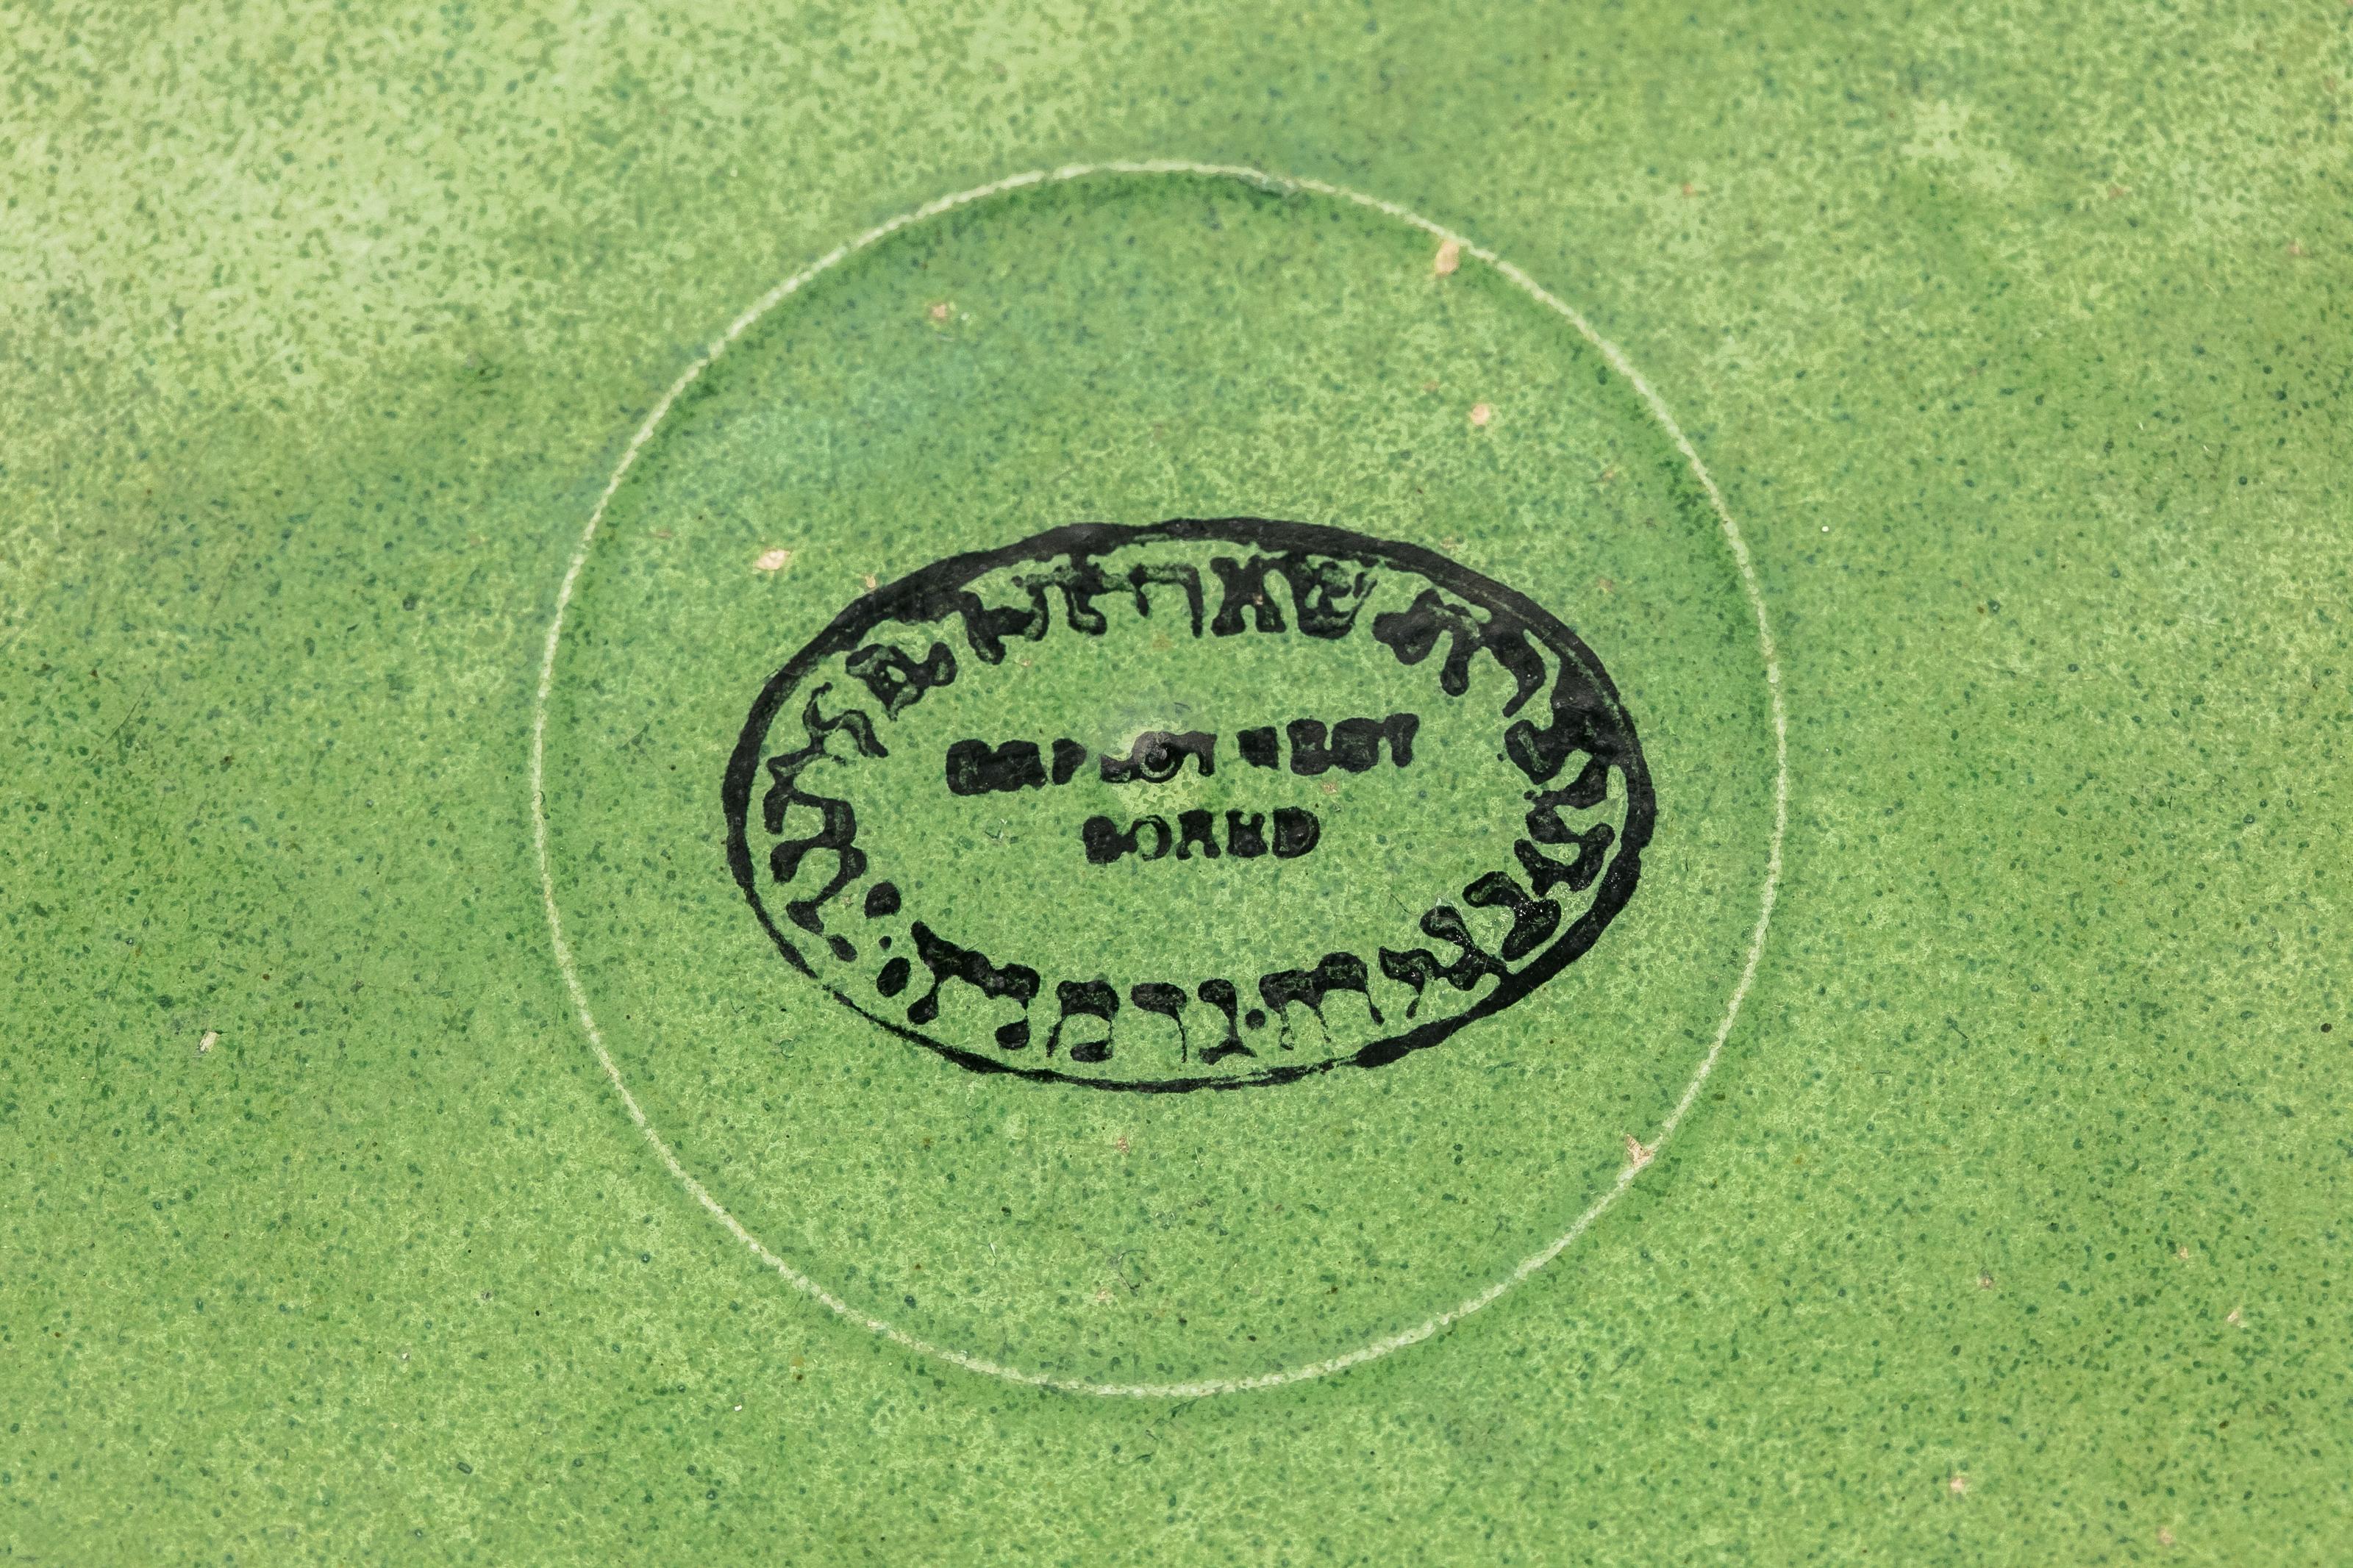 Post World War II Green Gazed Earthenware Passover Seder Plate In Good Condition In New York, NY